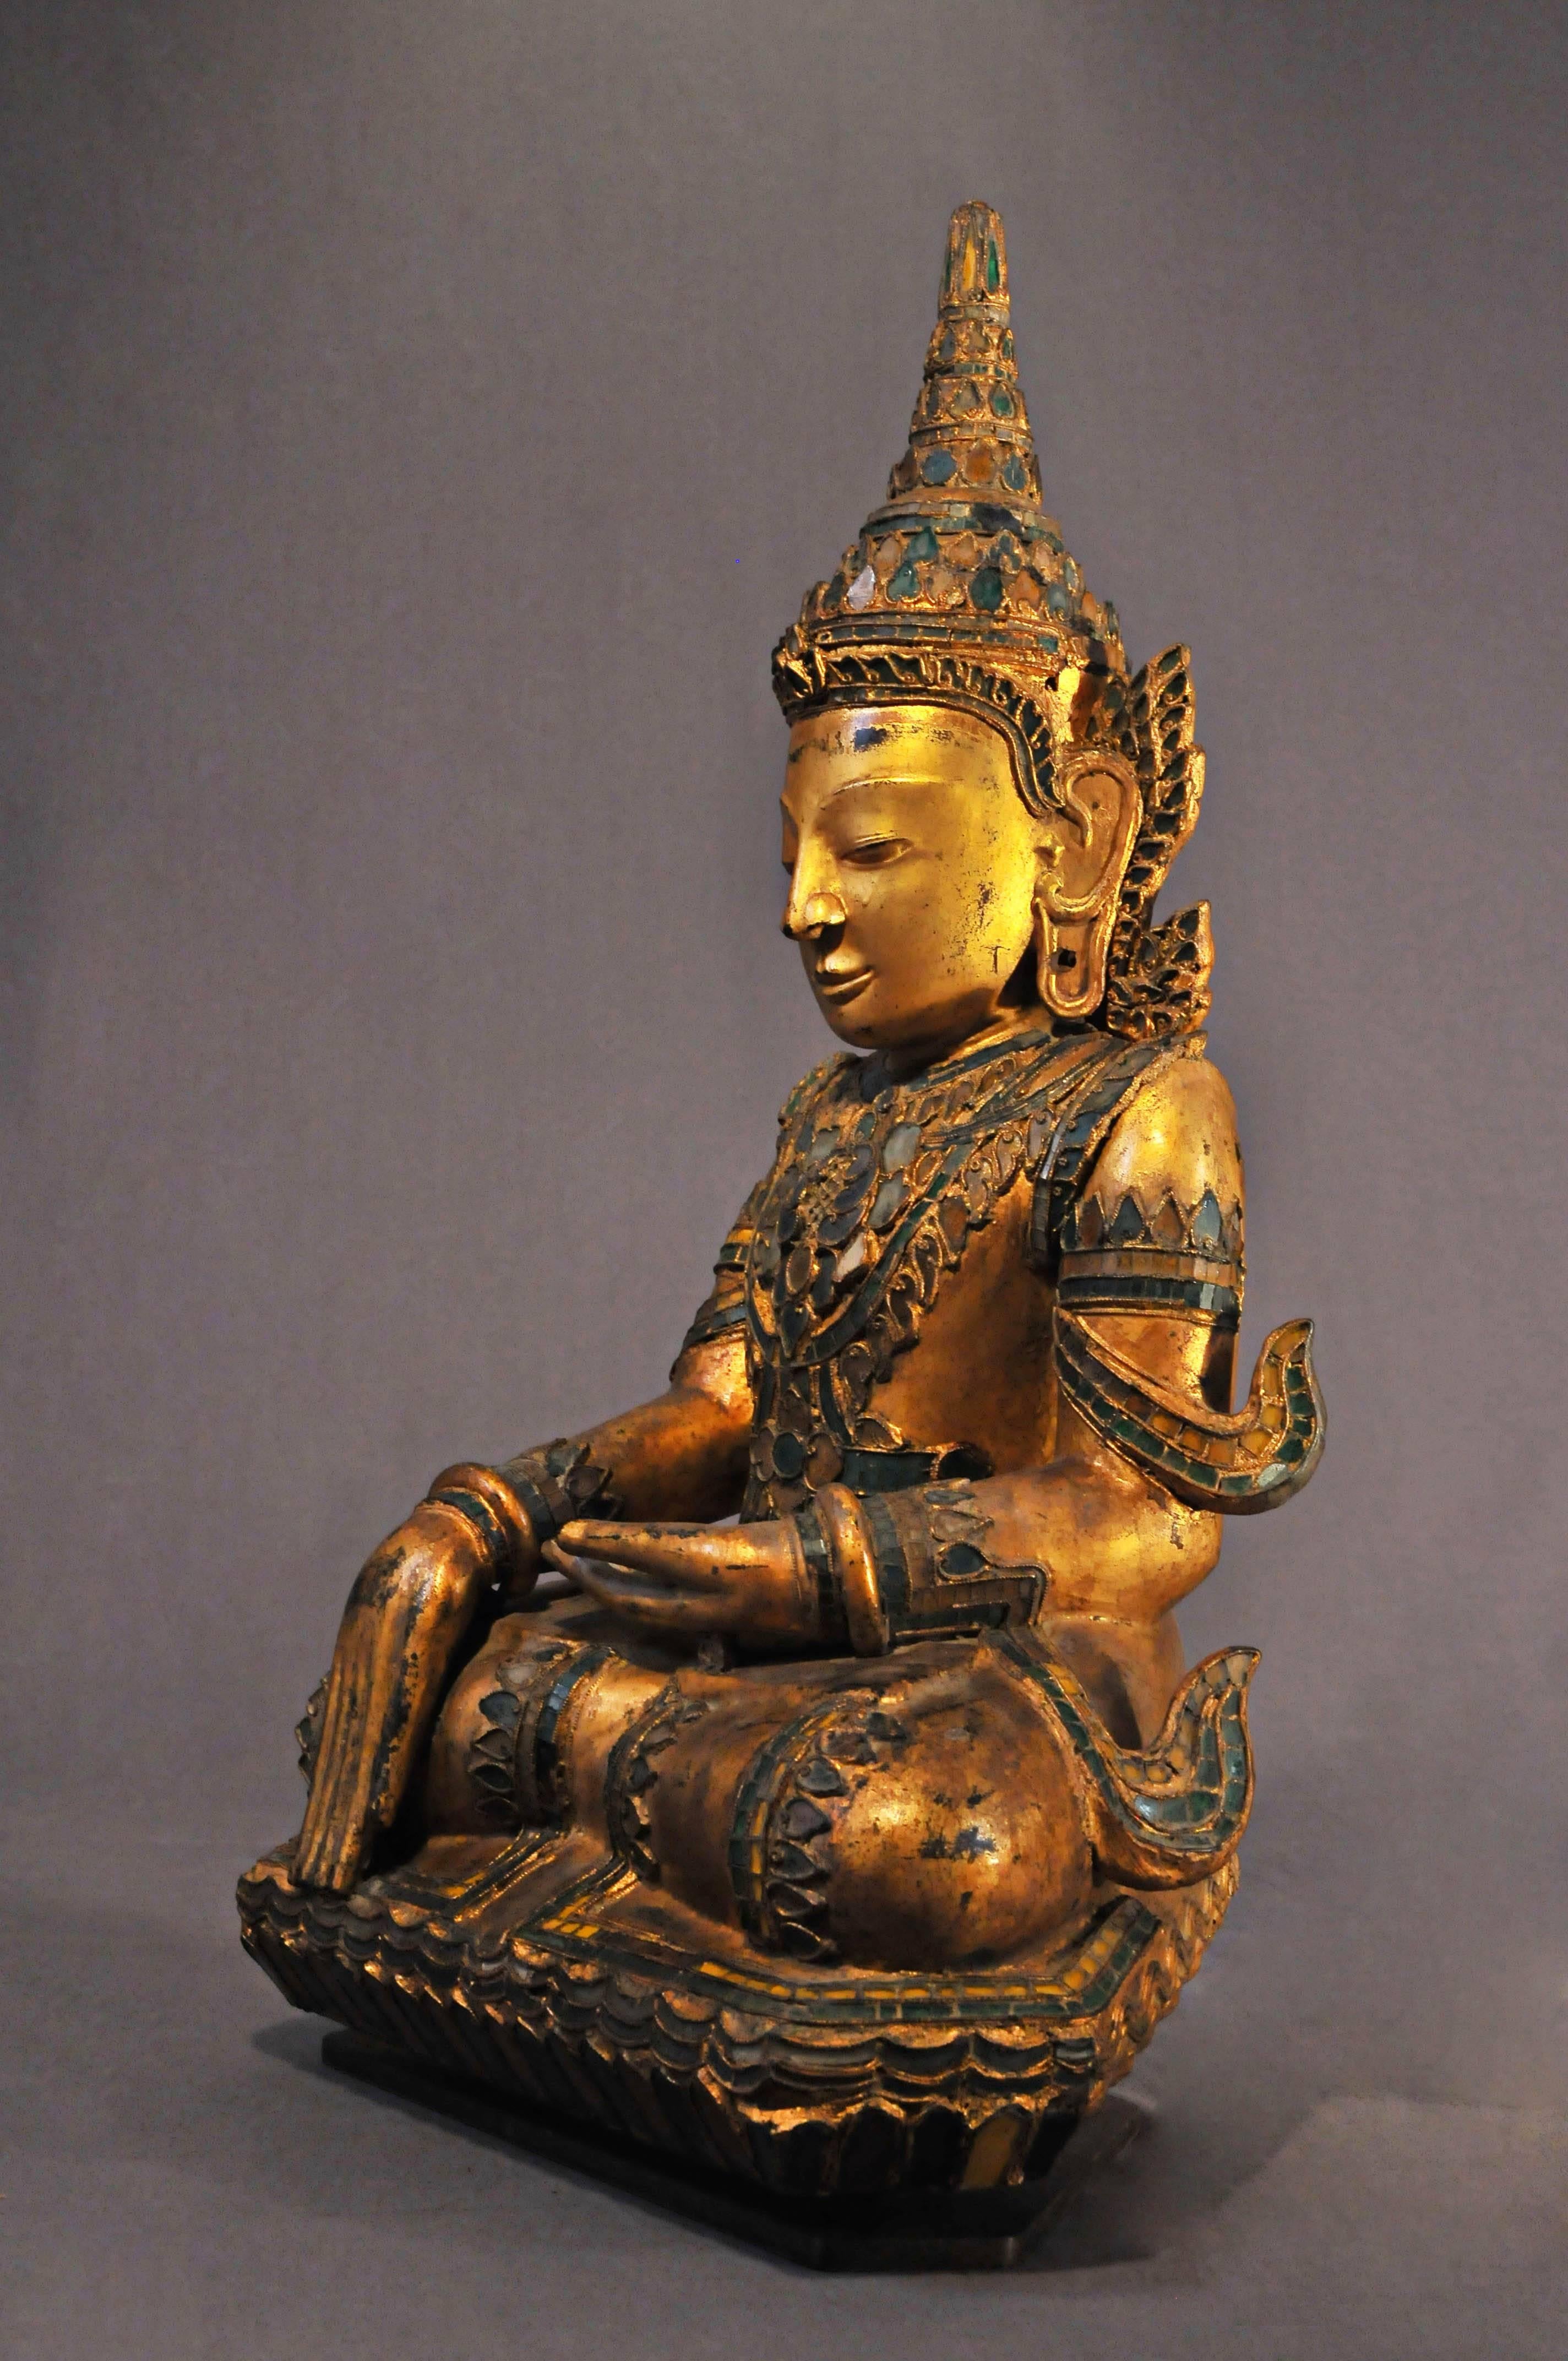 Burmese Early 19th Century, Gilt Lacquer with Glass Inlay Crowned Buddha, Thailand